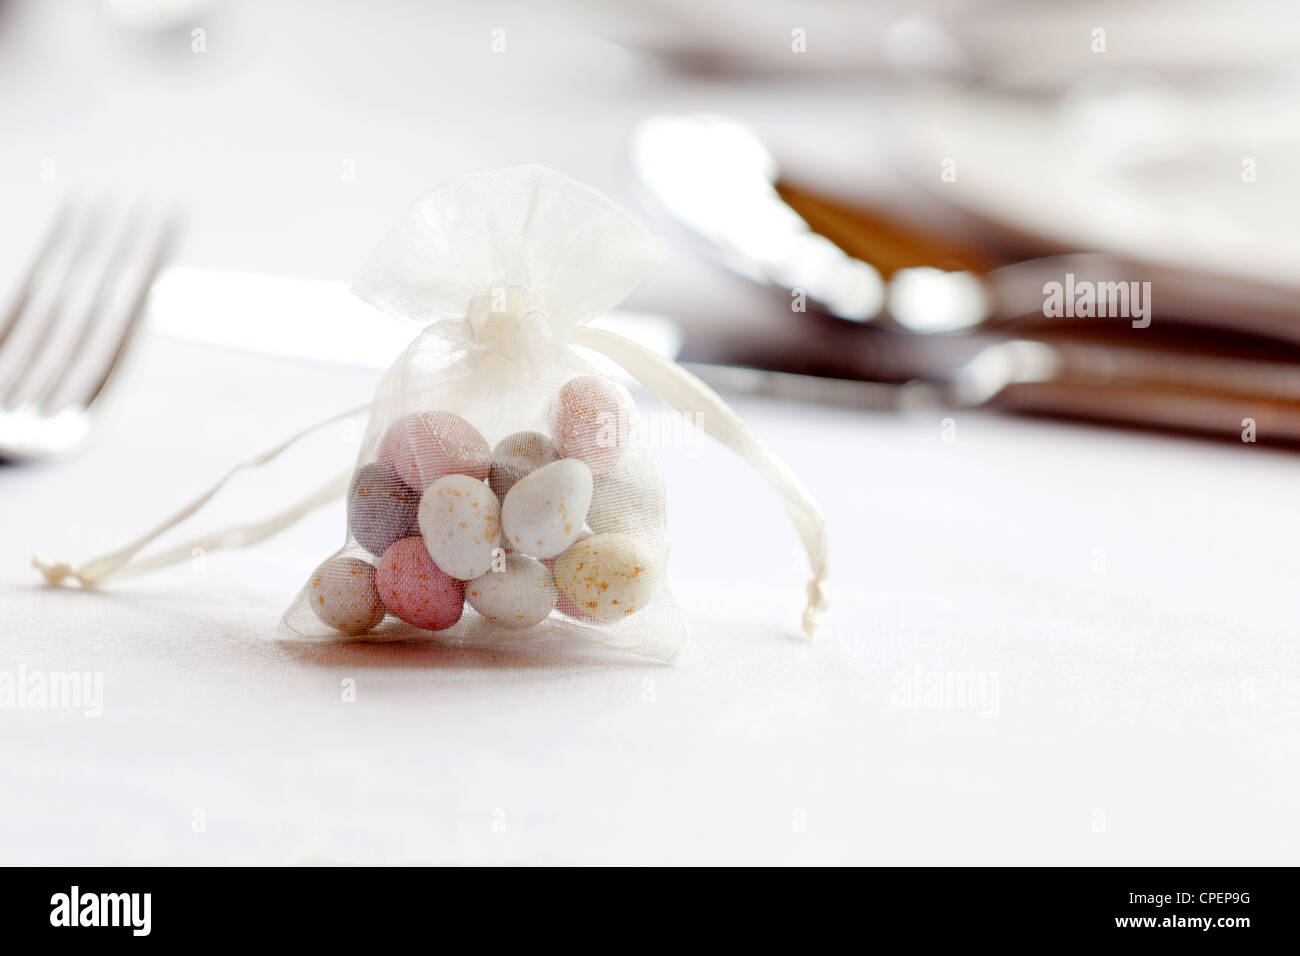 A small muslin bag of sugared almonds as a table decoration on a wedding table Stock Photo